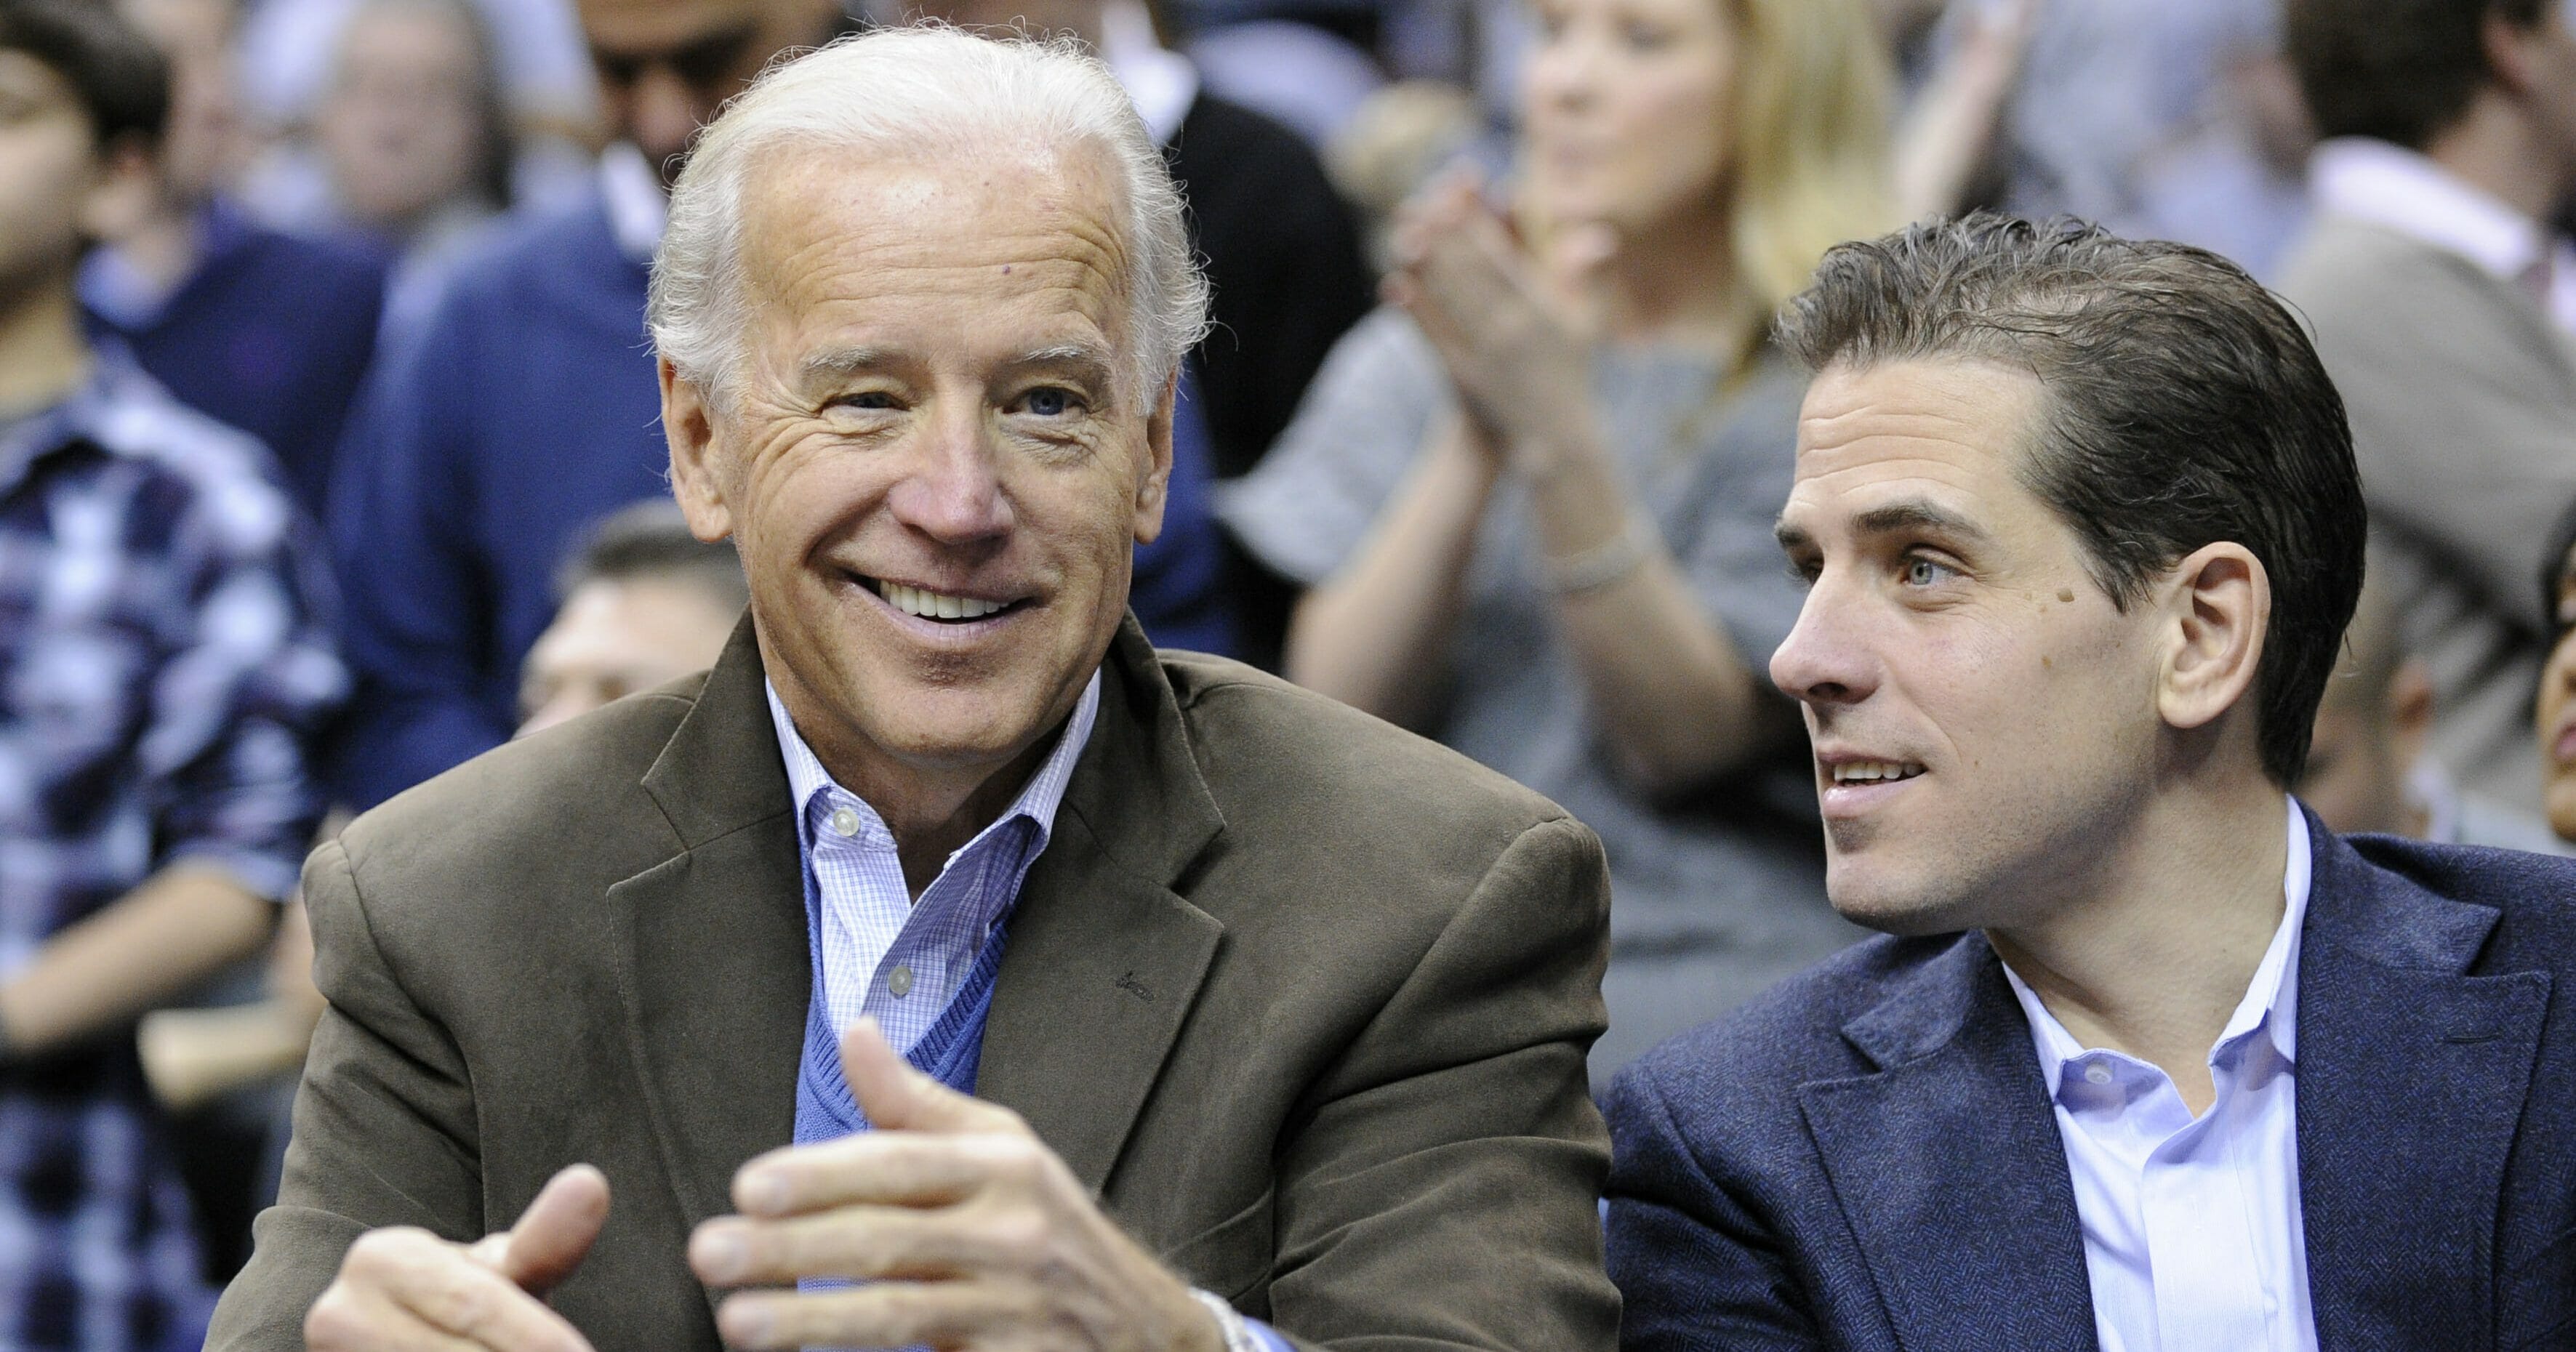 Then-Vice President Joe Biden attends an NCAA basketball game with his son Hunter, right, on Jan. 30, 2010, in Washington.